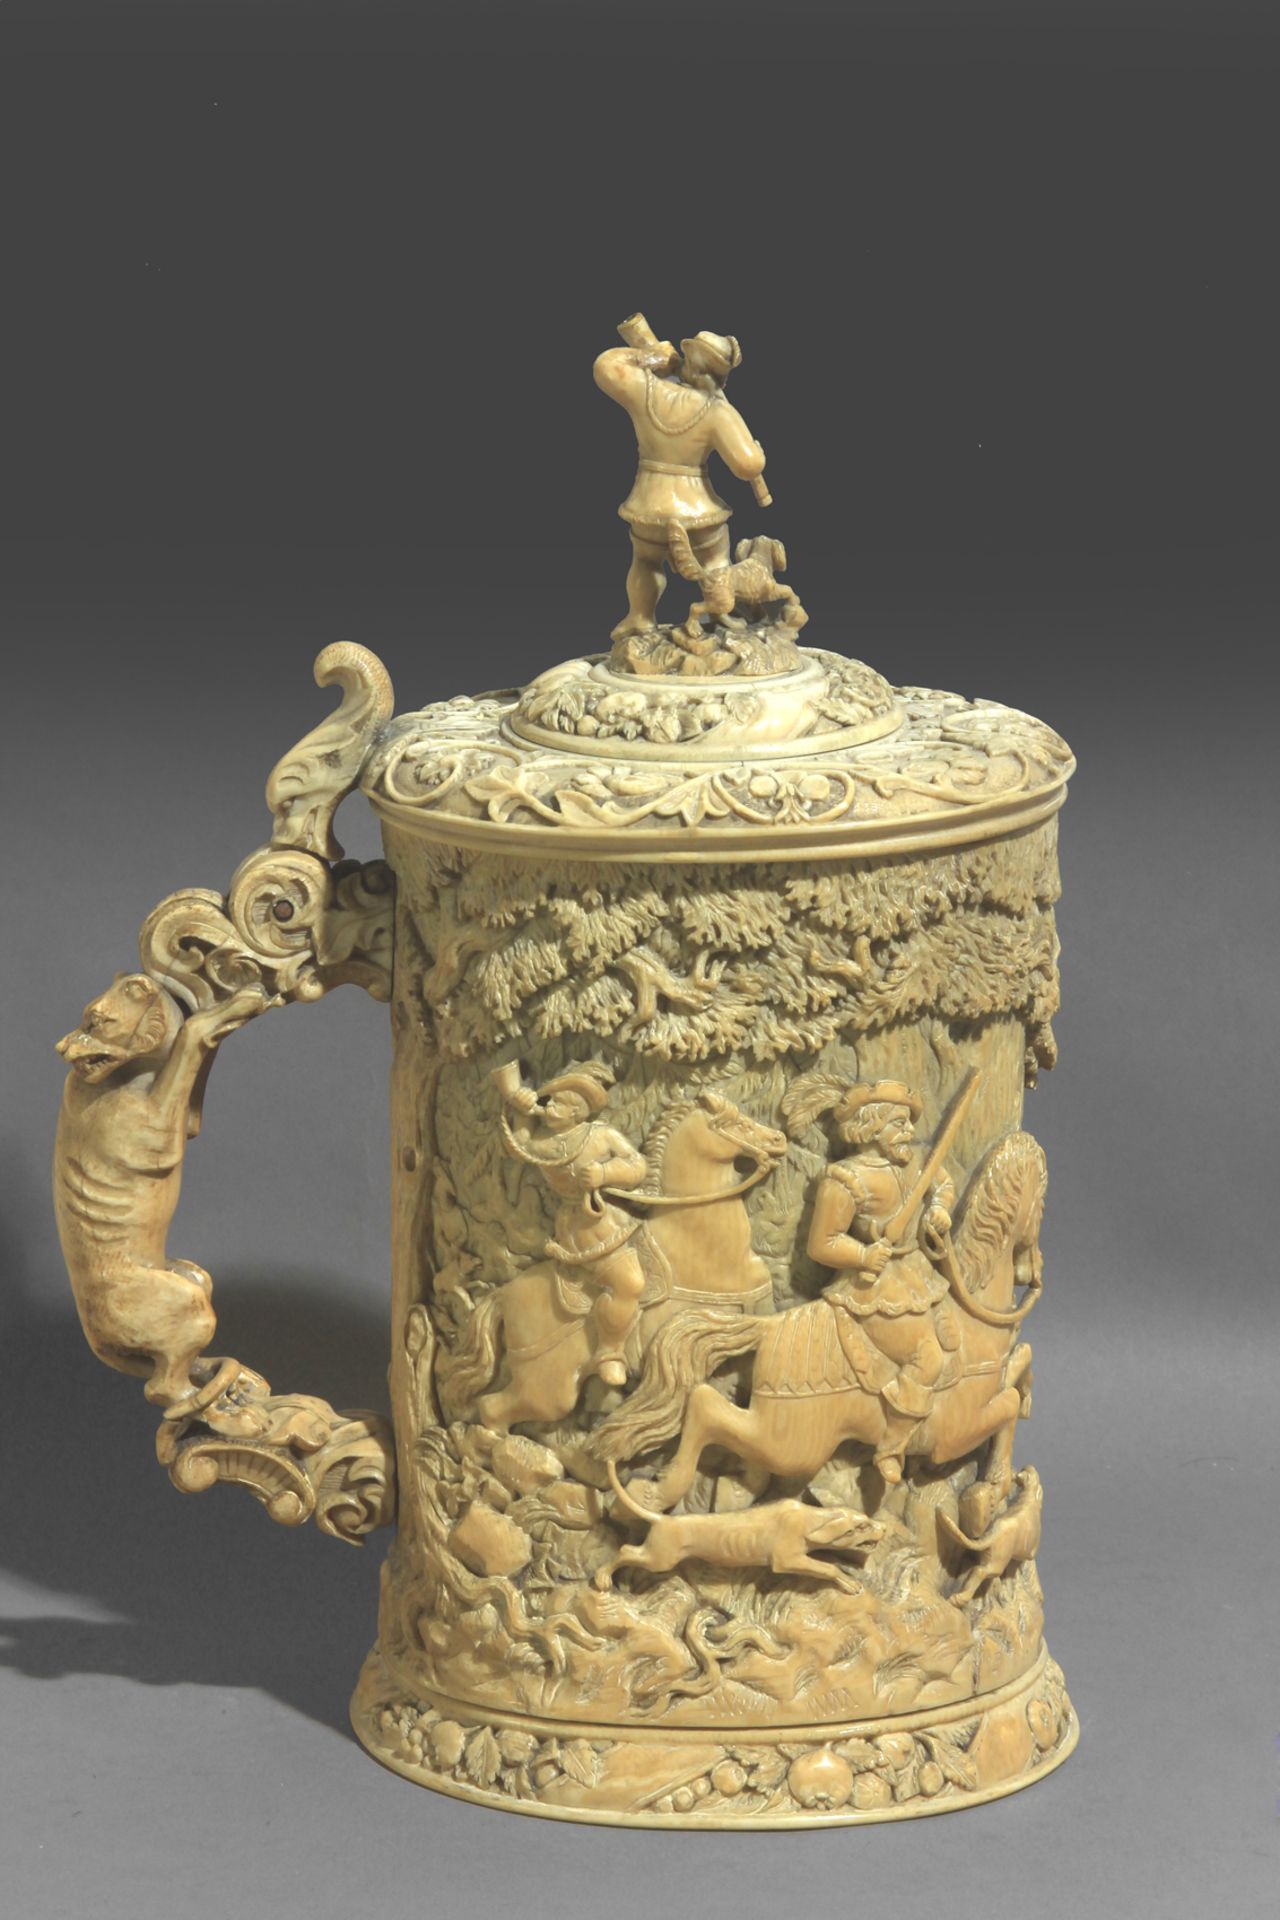 Early 18th century possibly German tankard - Image 8 of 14